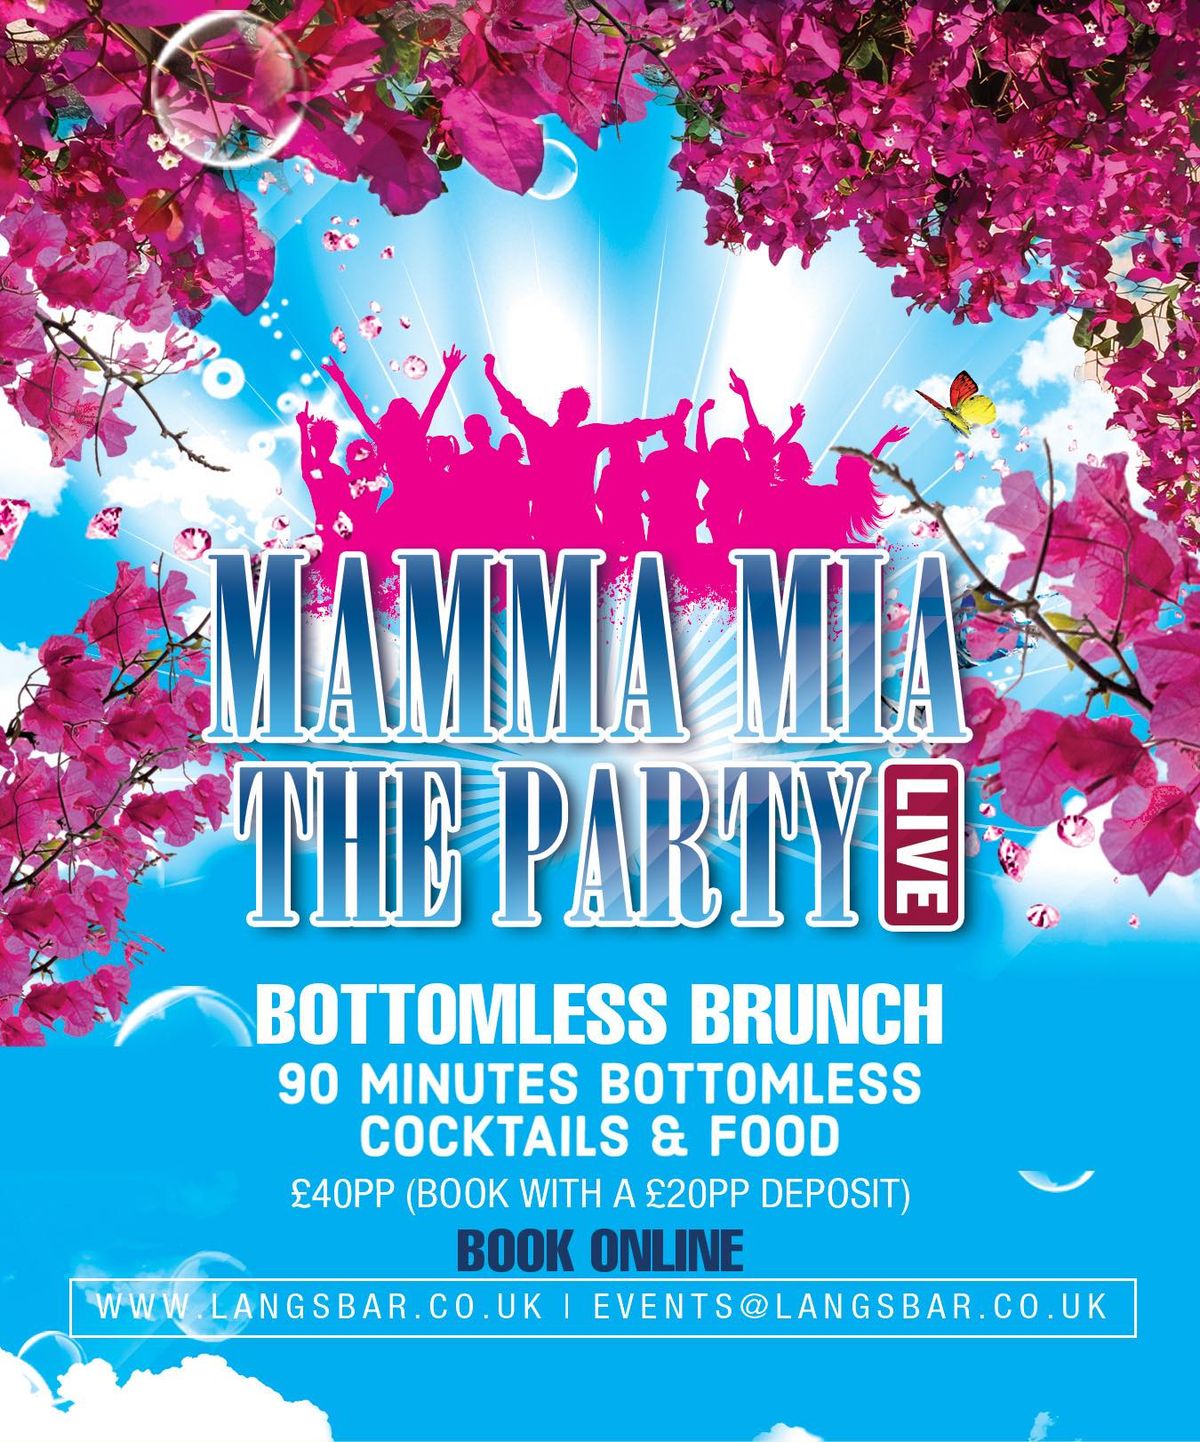 MAMMA MIA THE PARTY LIVE BOTTOMLESS BRUNCH